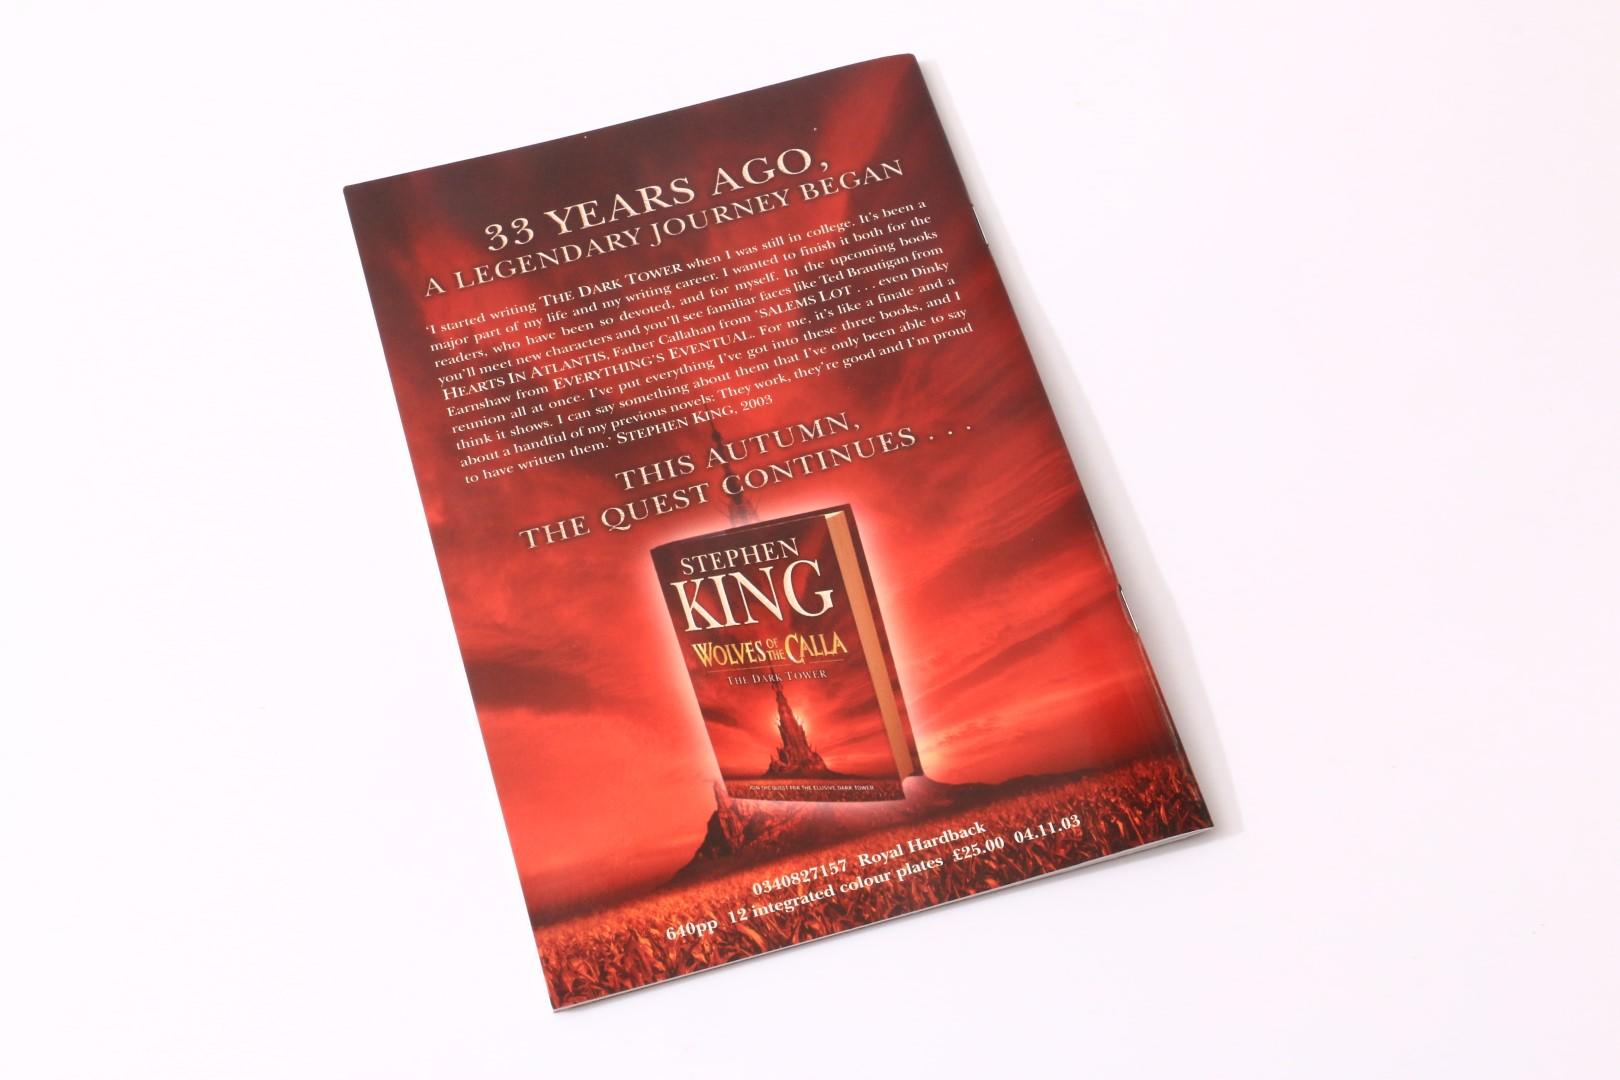 Stephen King - The Return of the King: The Dark Tower, Introduction and Extract from Wolves of the Calla. - Hodder & Stoughton, 2003, Proof.